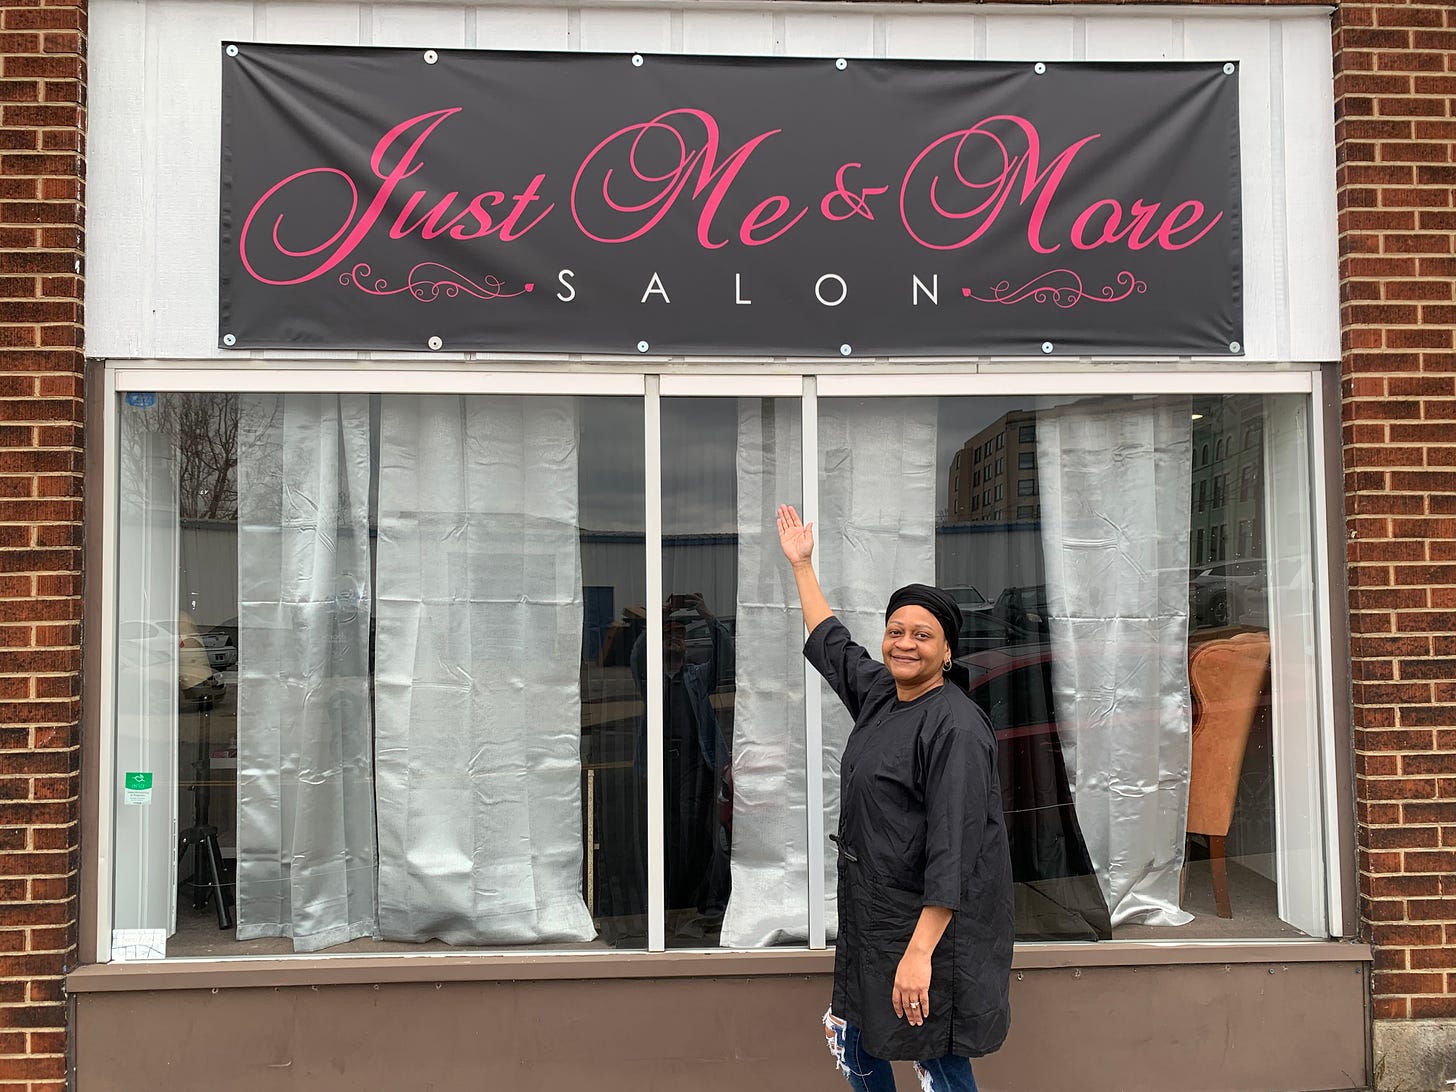 A picture showing Ms Rica Dabney gesturing towards her business' sign that says "Just Me & More" salon